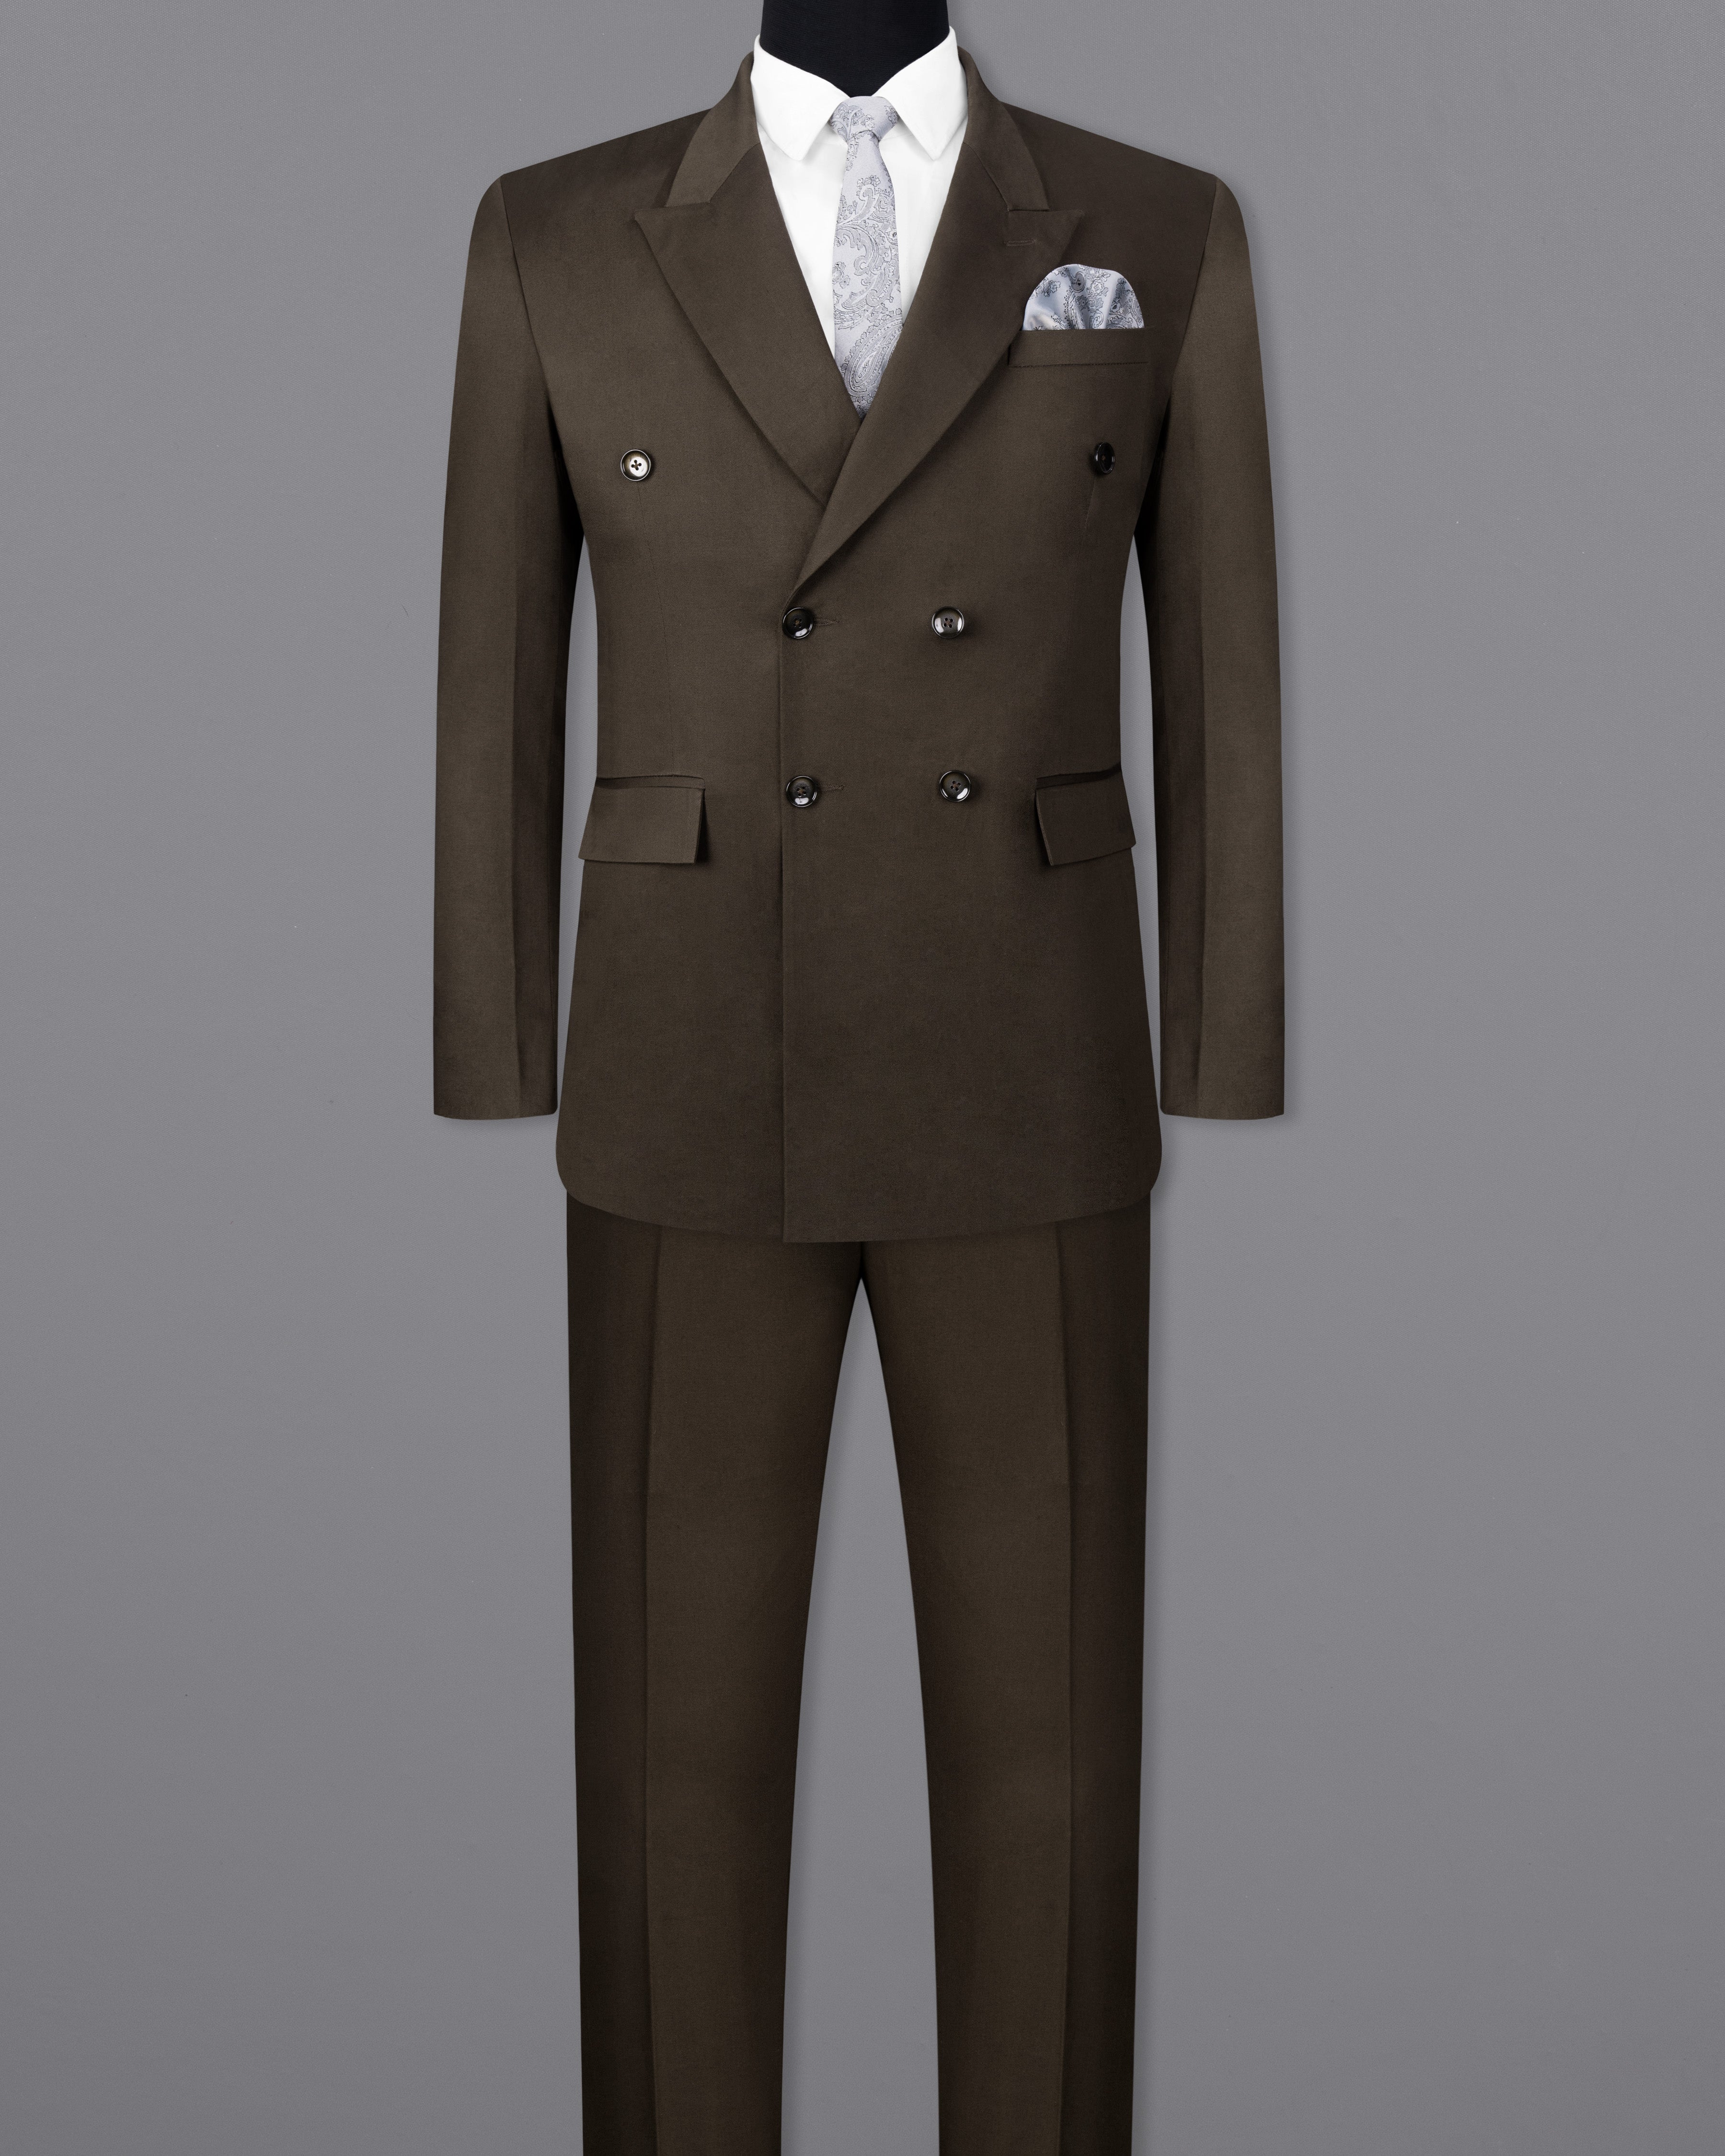 Walnut Brown Solid Stretchable Premium Cotton Double Breasted Traveler Suit ST2628-DB-36, ST2628-DB-38, ST2628-DB-40, ST2628-DB-42, ST2628-DB-44, ST2628-DB-46, ST2628-DB-48, ST2628-DB-50, ST2628-DB-52, ST2628-DB-54, ST2628-DB-56, ST2628-DB-58, ST2628-DB-60